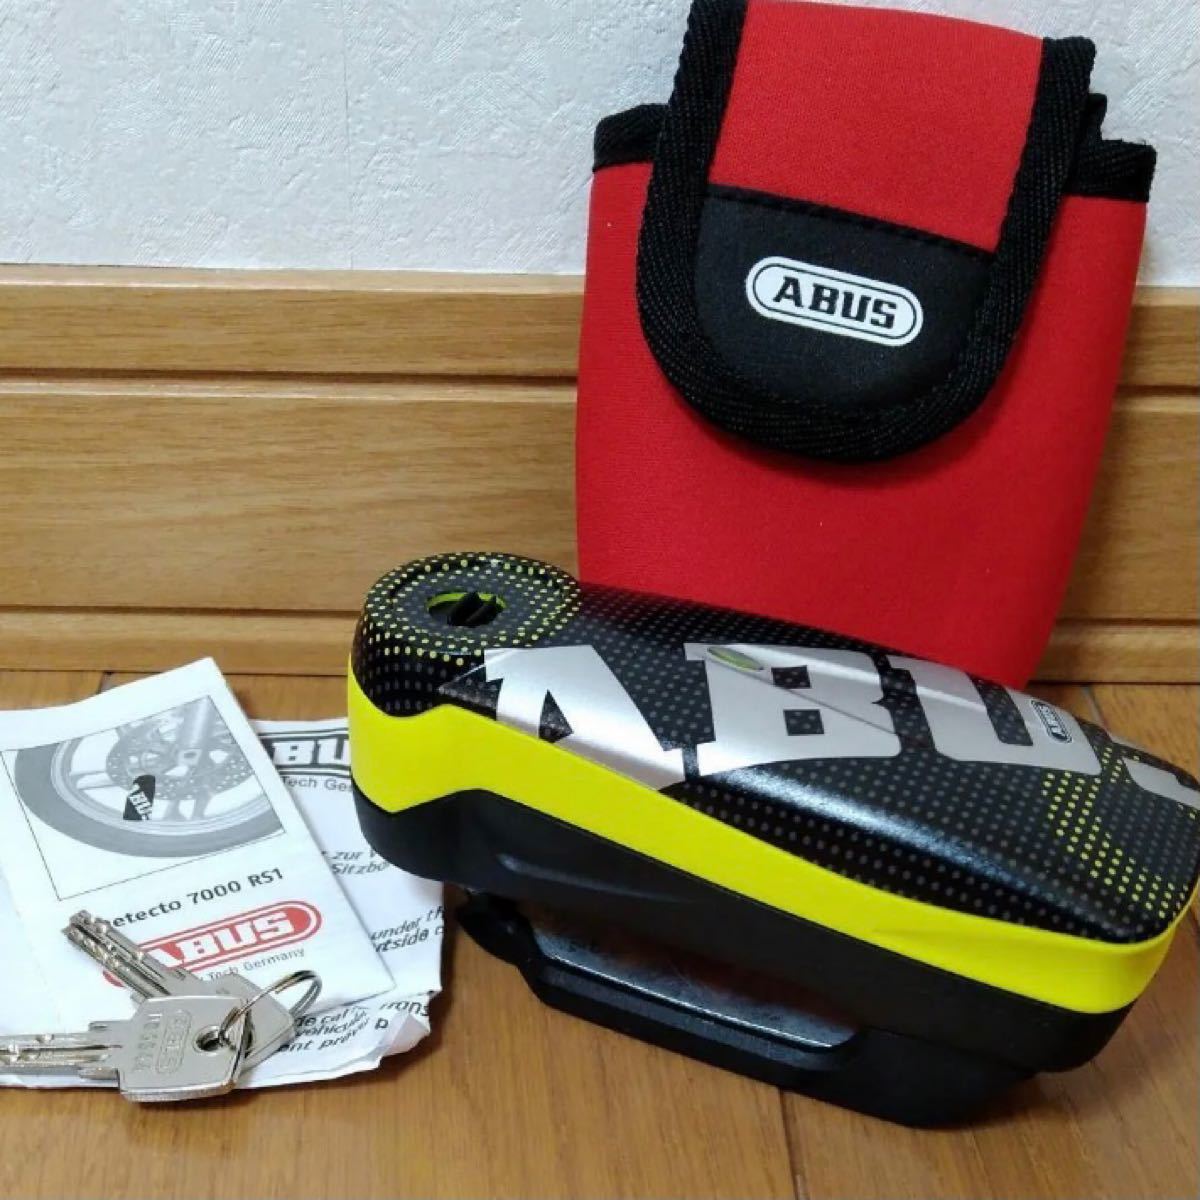 SALE／68%OFF】 ABUS ディスクロック Detecto7000 RS1 logo yellow 